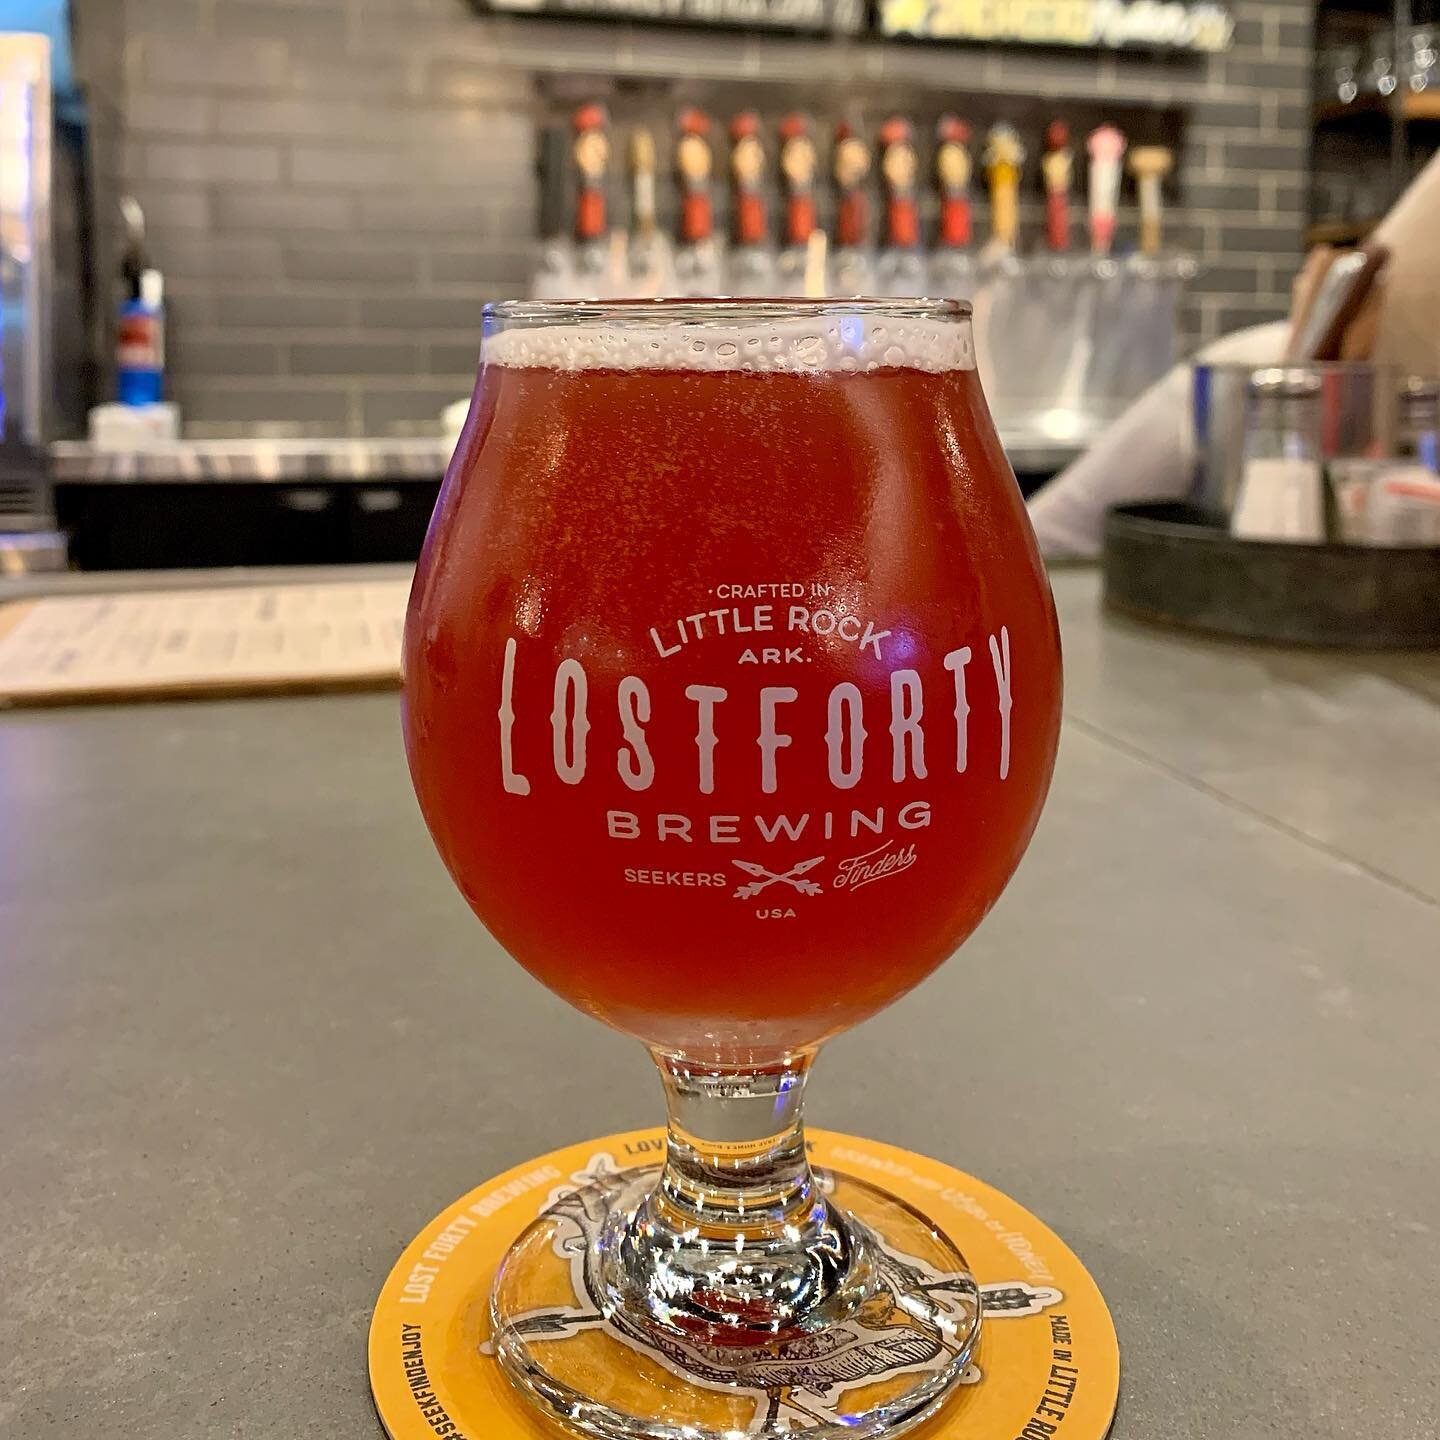 Whether you&rsquo;re looking for a beer or even a seltzer, @lost40beer has something for everyone. We sampled the Currant Mood Cherry Ale during our recent trip and it didn&rsquo;t disappoint! 🍒 Read more about our visit to this #LittleRock spot on 